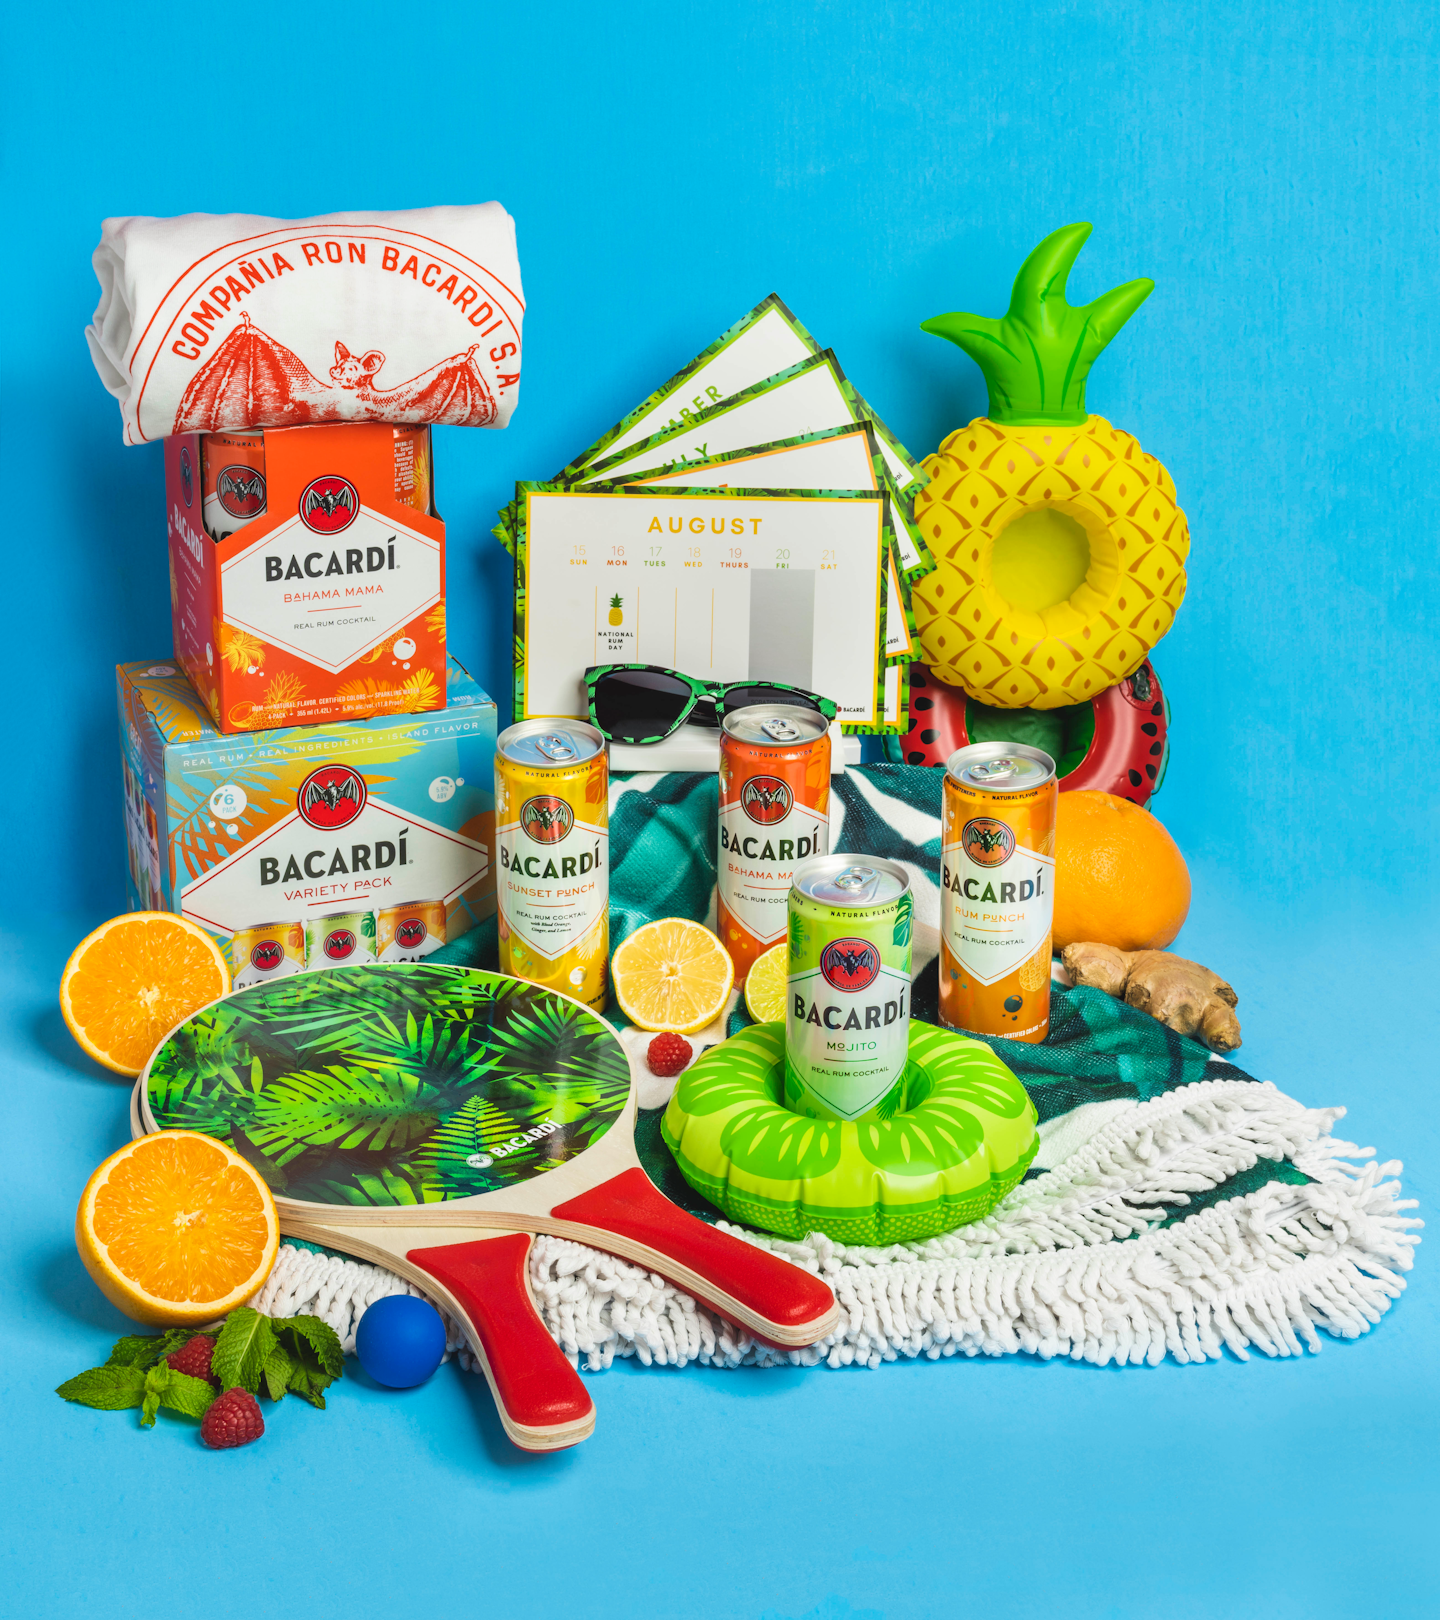 The Bacardĺ Summer Friday Deluxe Kit includes the brand’s new Real Rum Canned Cocktails, palm-print sunglasses, a branded T-shirt, paddle ball set, beach towel, a fruity can drink floatie and a custom scratch-off calendar that includes discount codes and out-of-office inspiration.